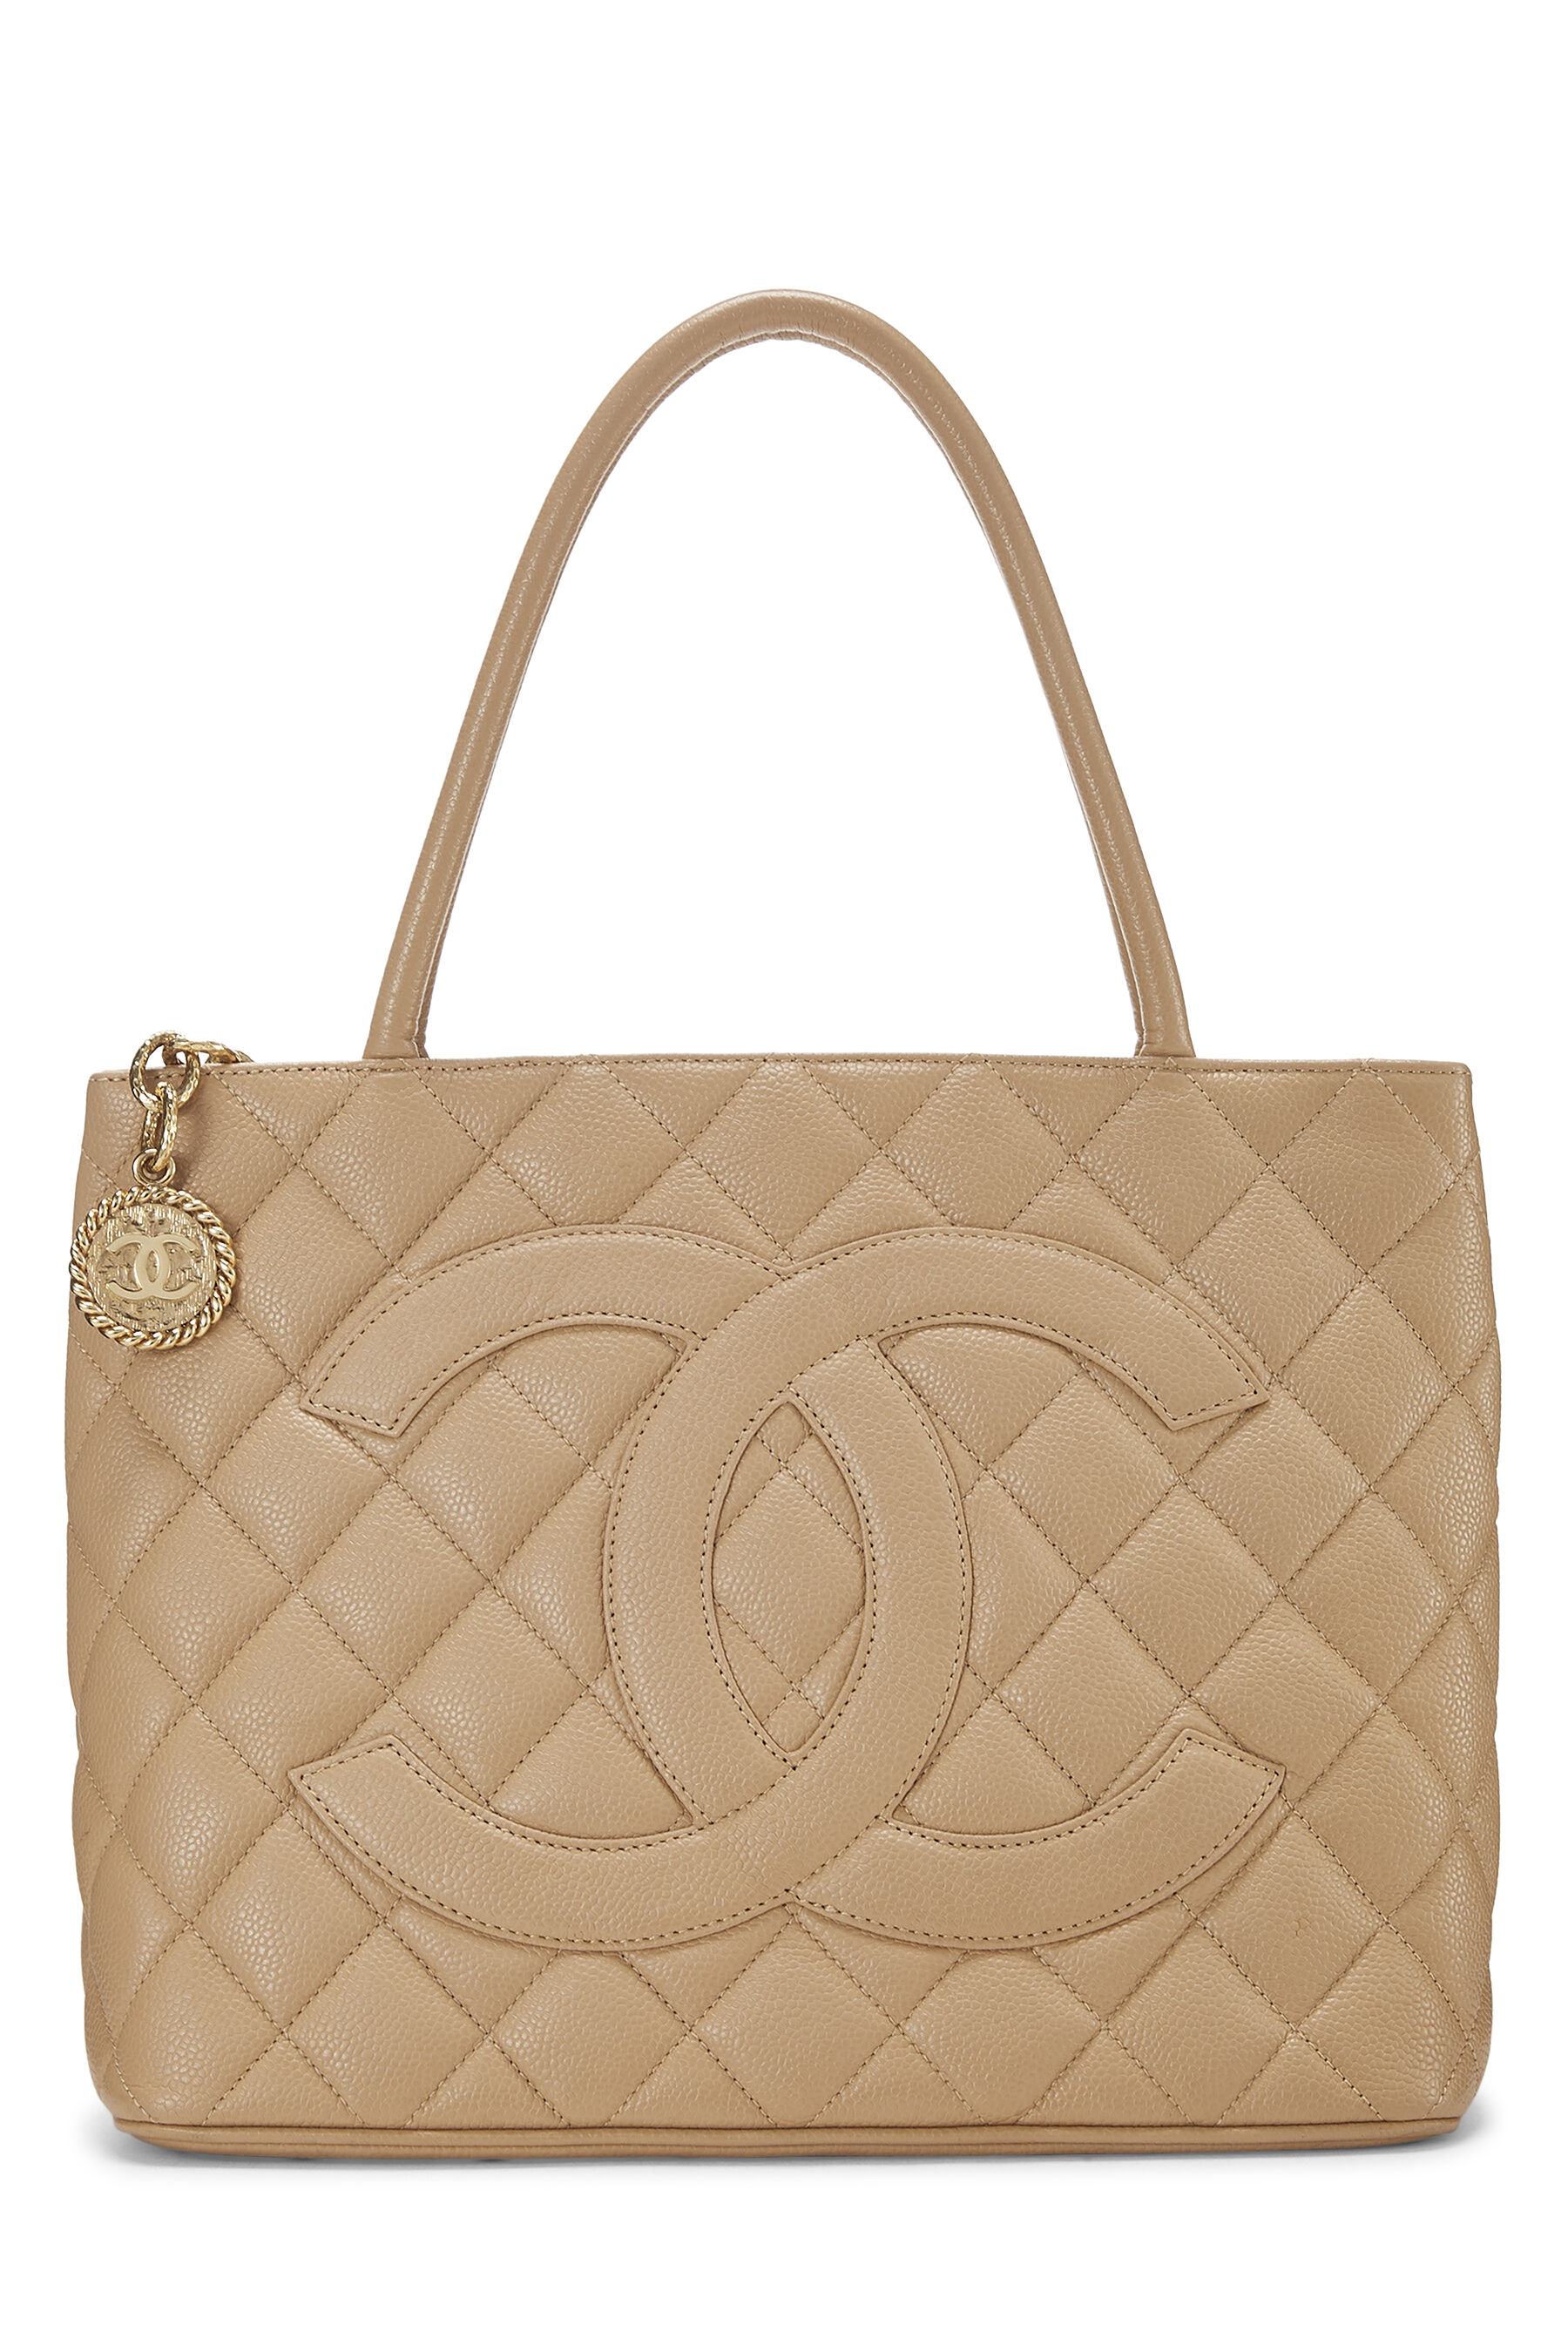 Chanel Beige Quilted Caviar Medallion Tote